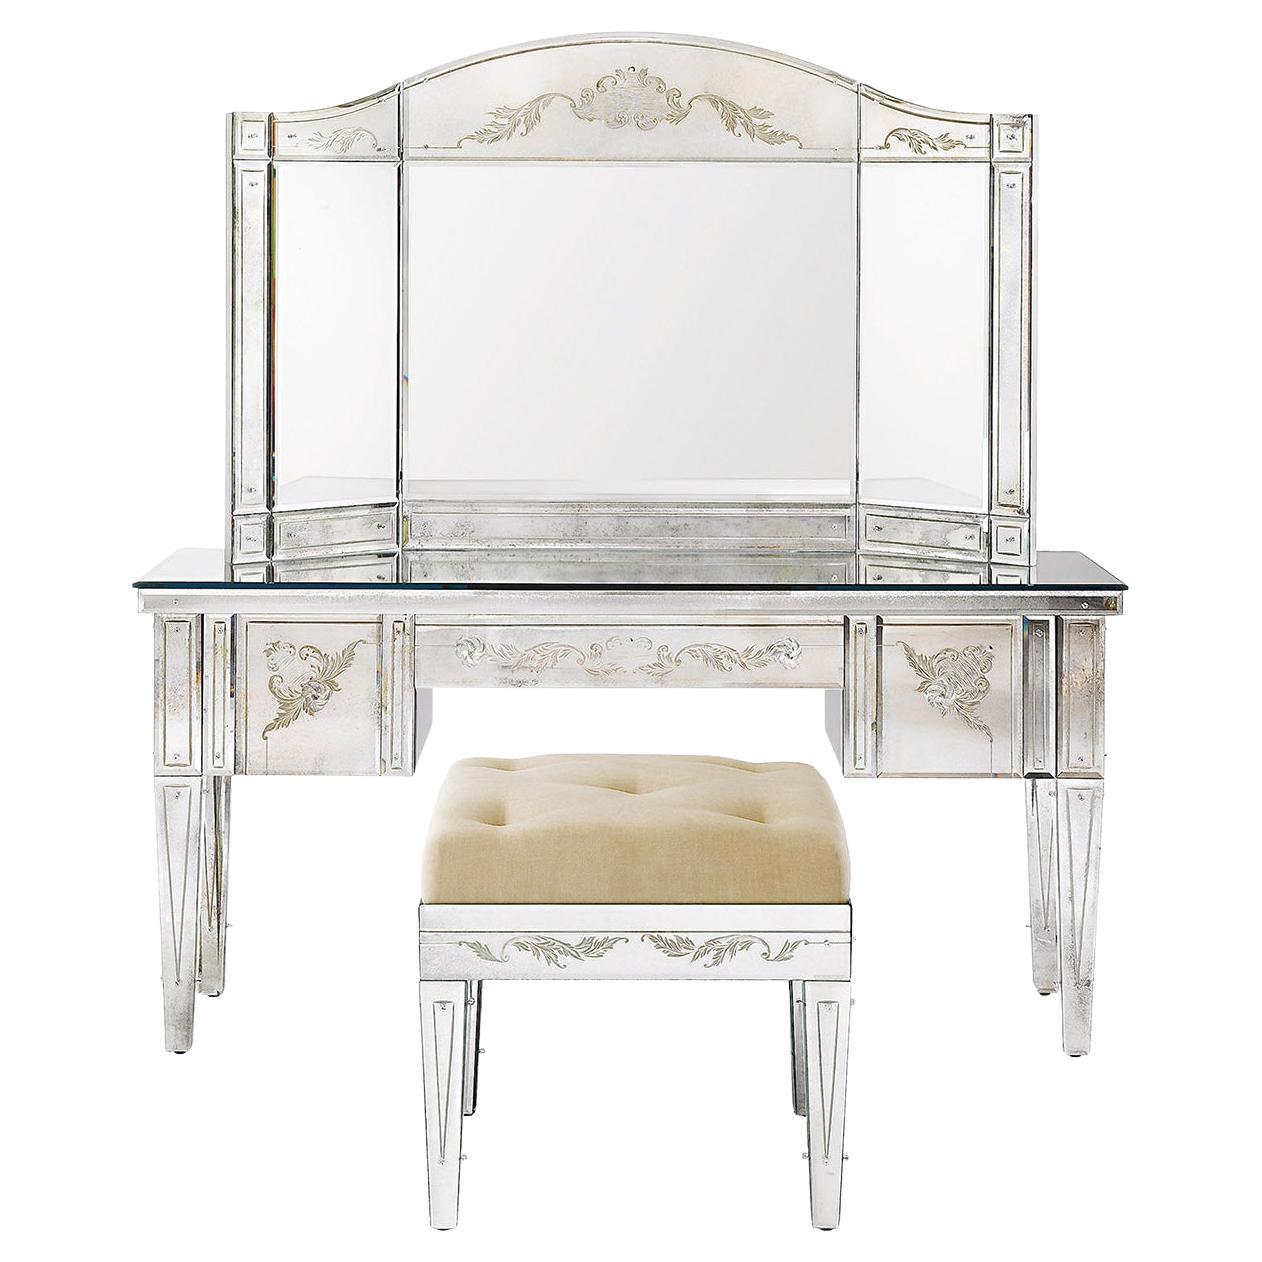 Curatie Make-up Table For Sale